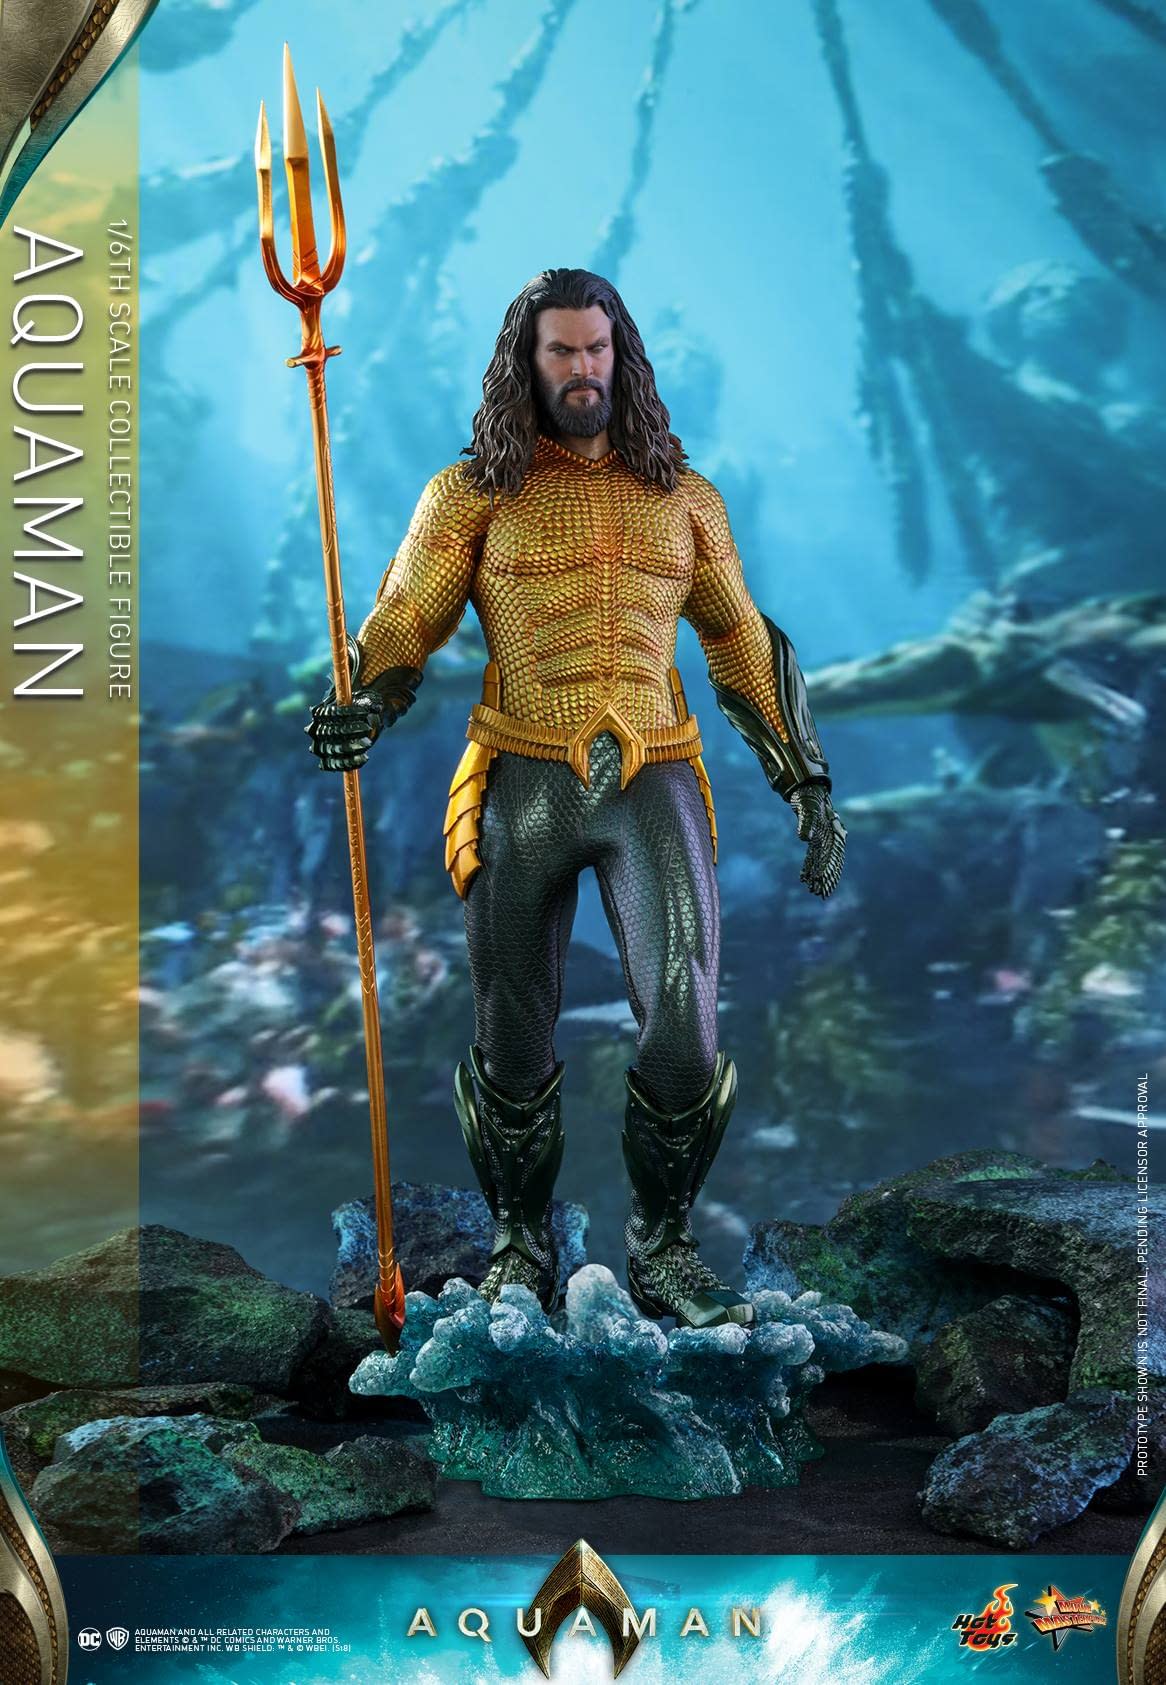 Aquaman Gets a Hot Toys Figure Release in 2019